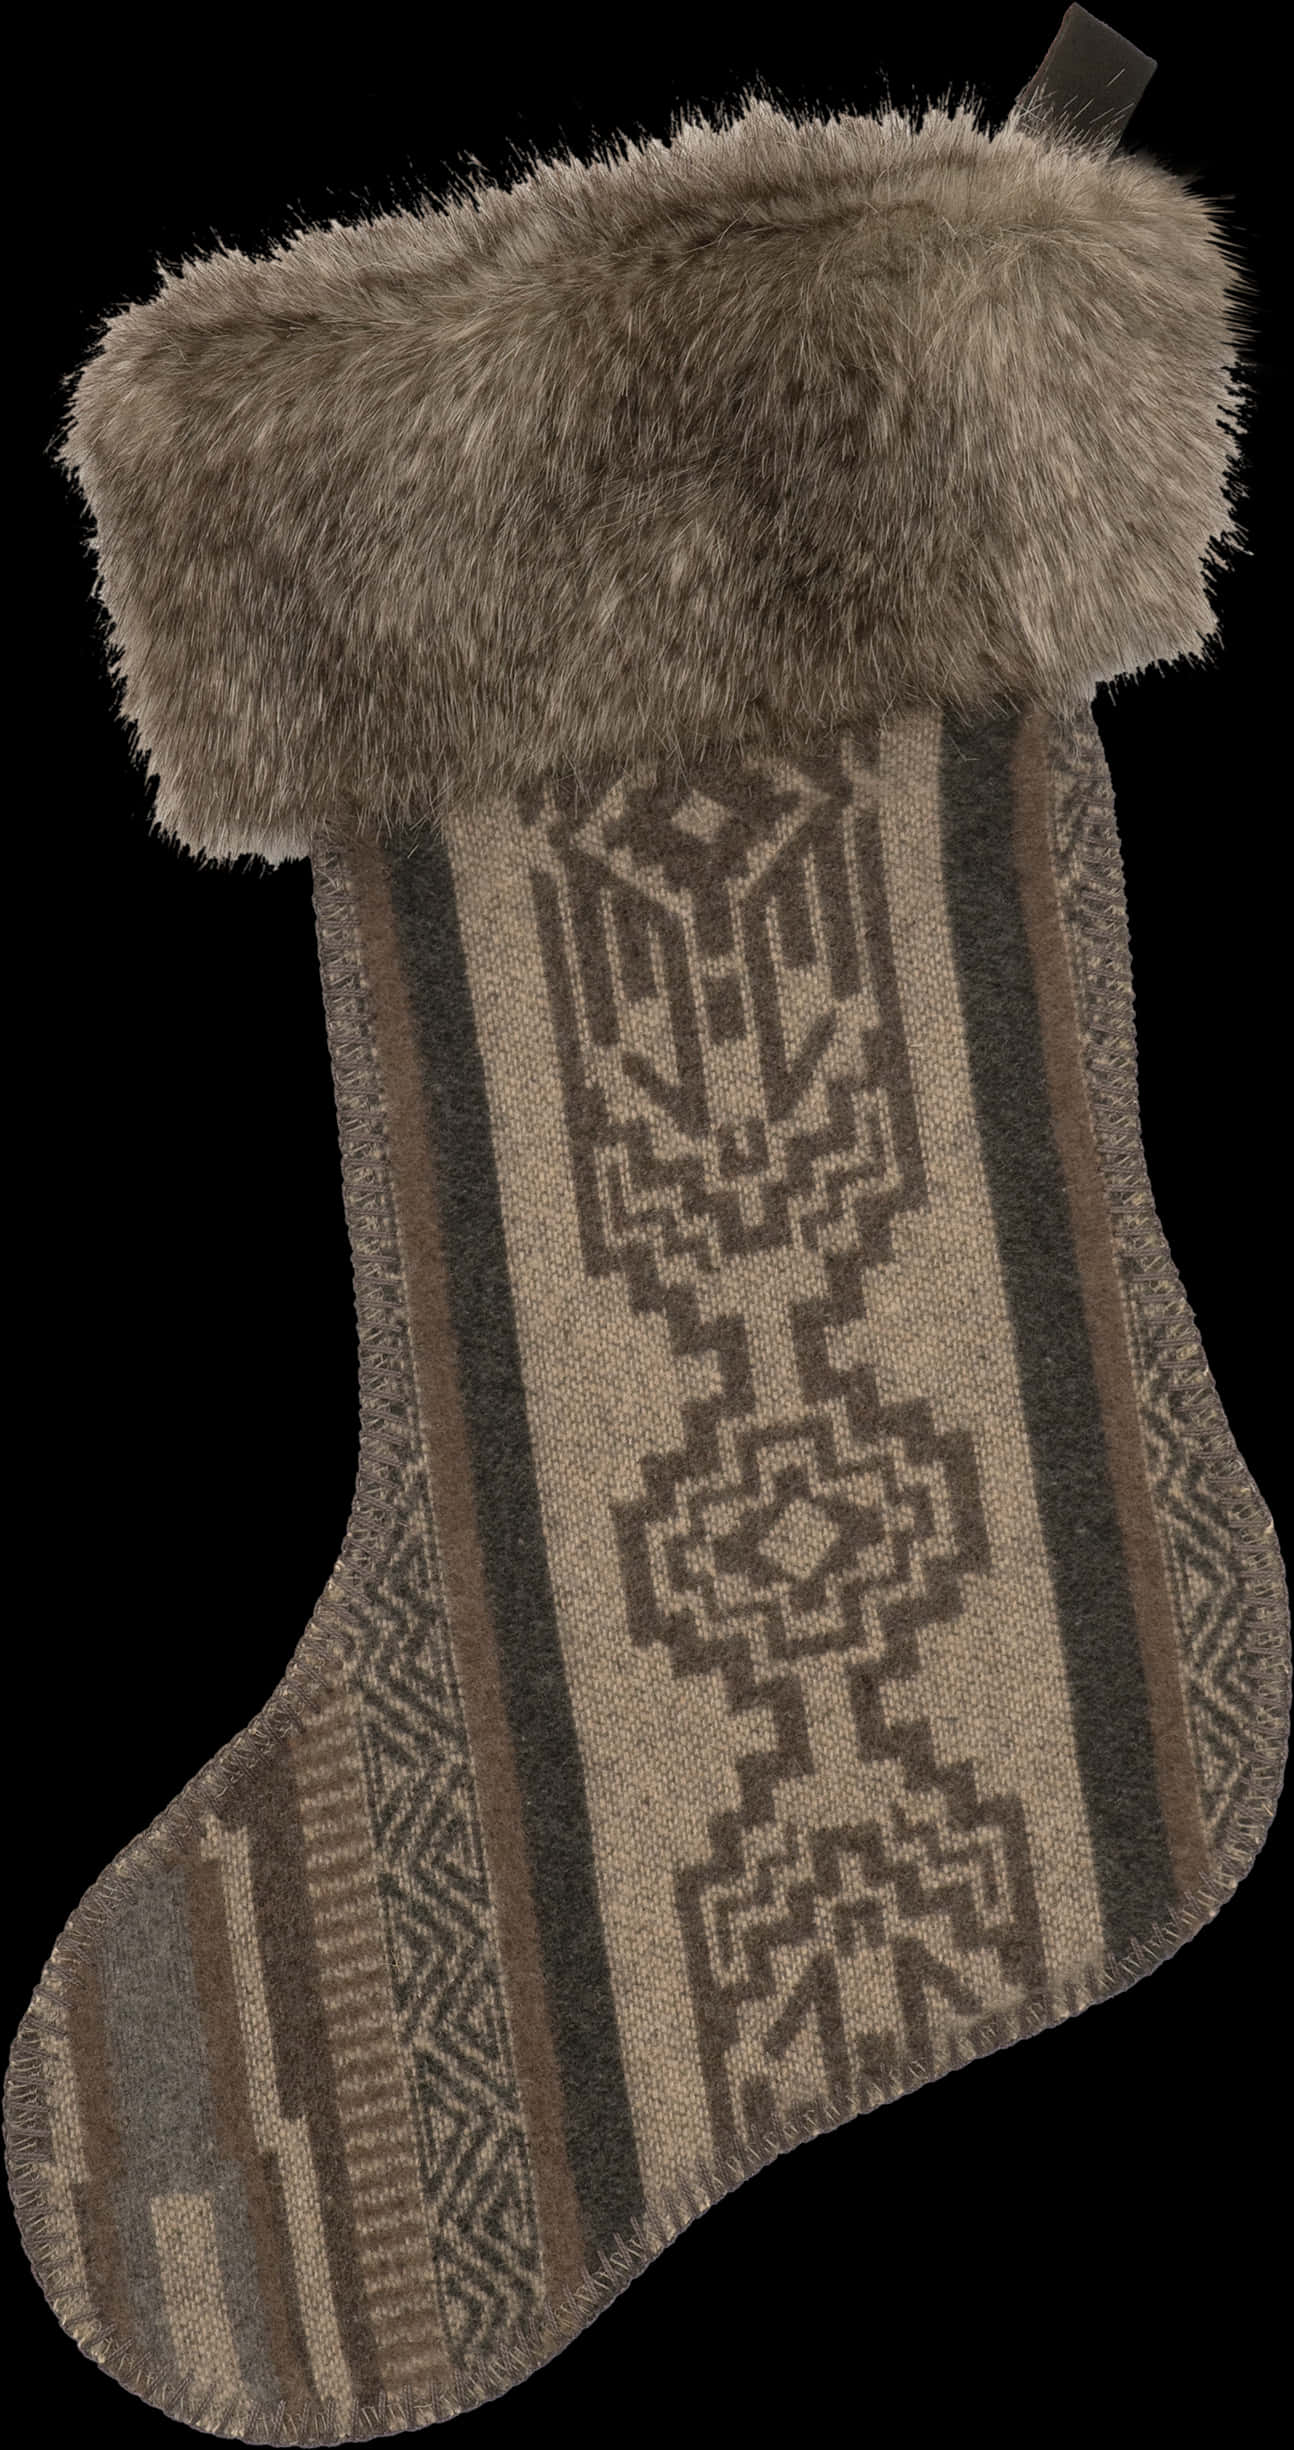 A Brown And Tan Stocking With A Fur Trimmed Top